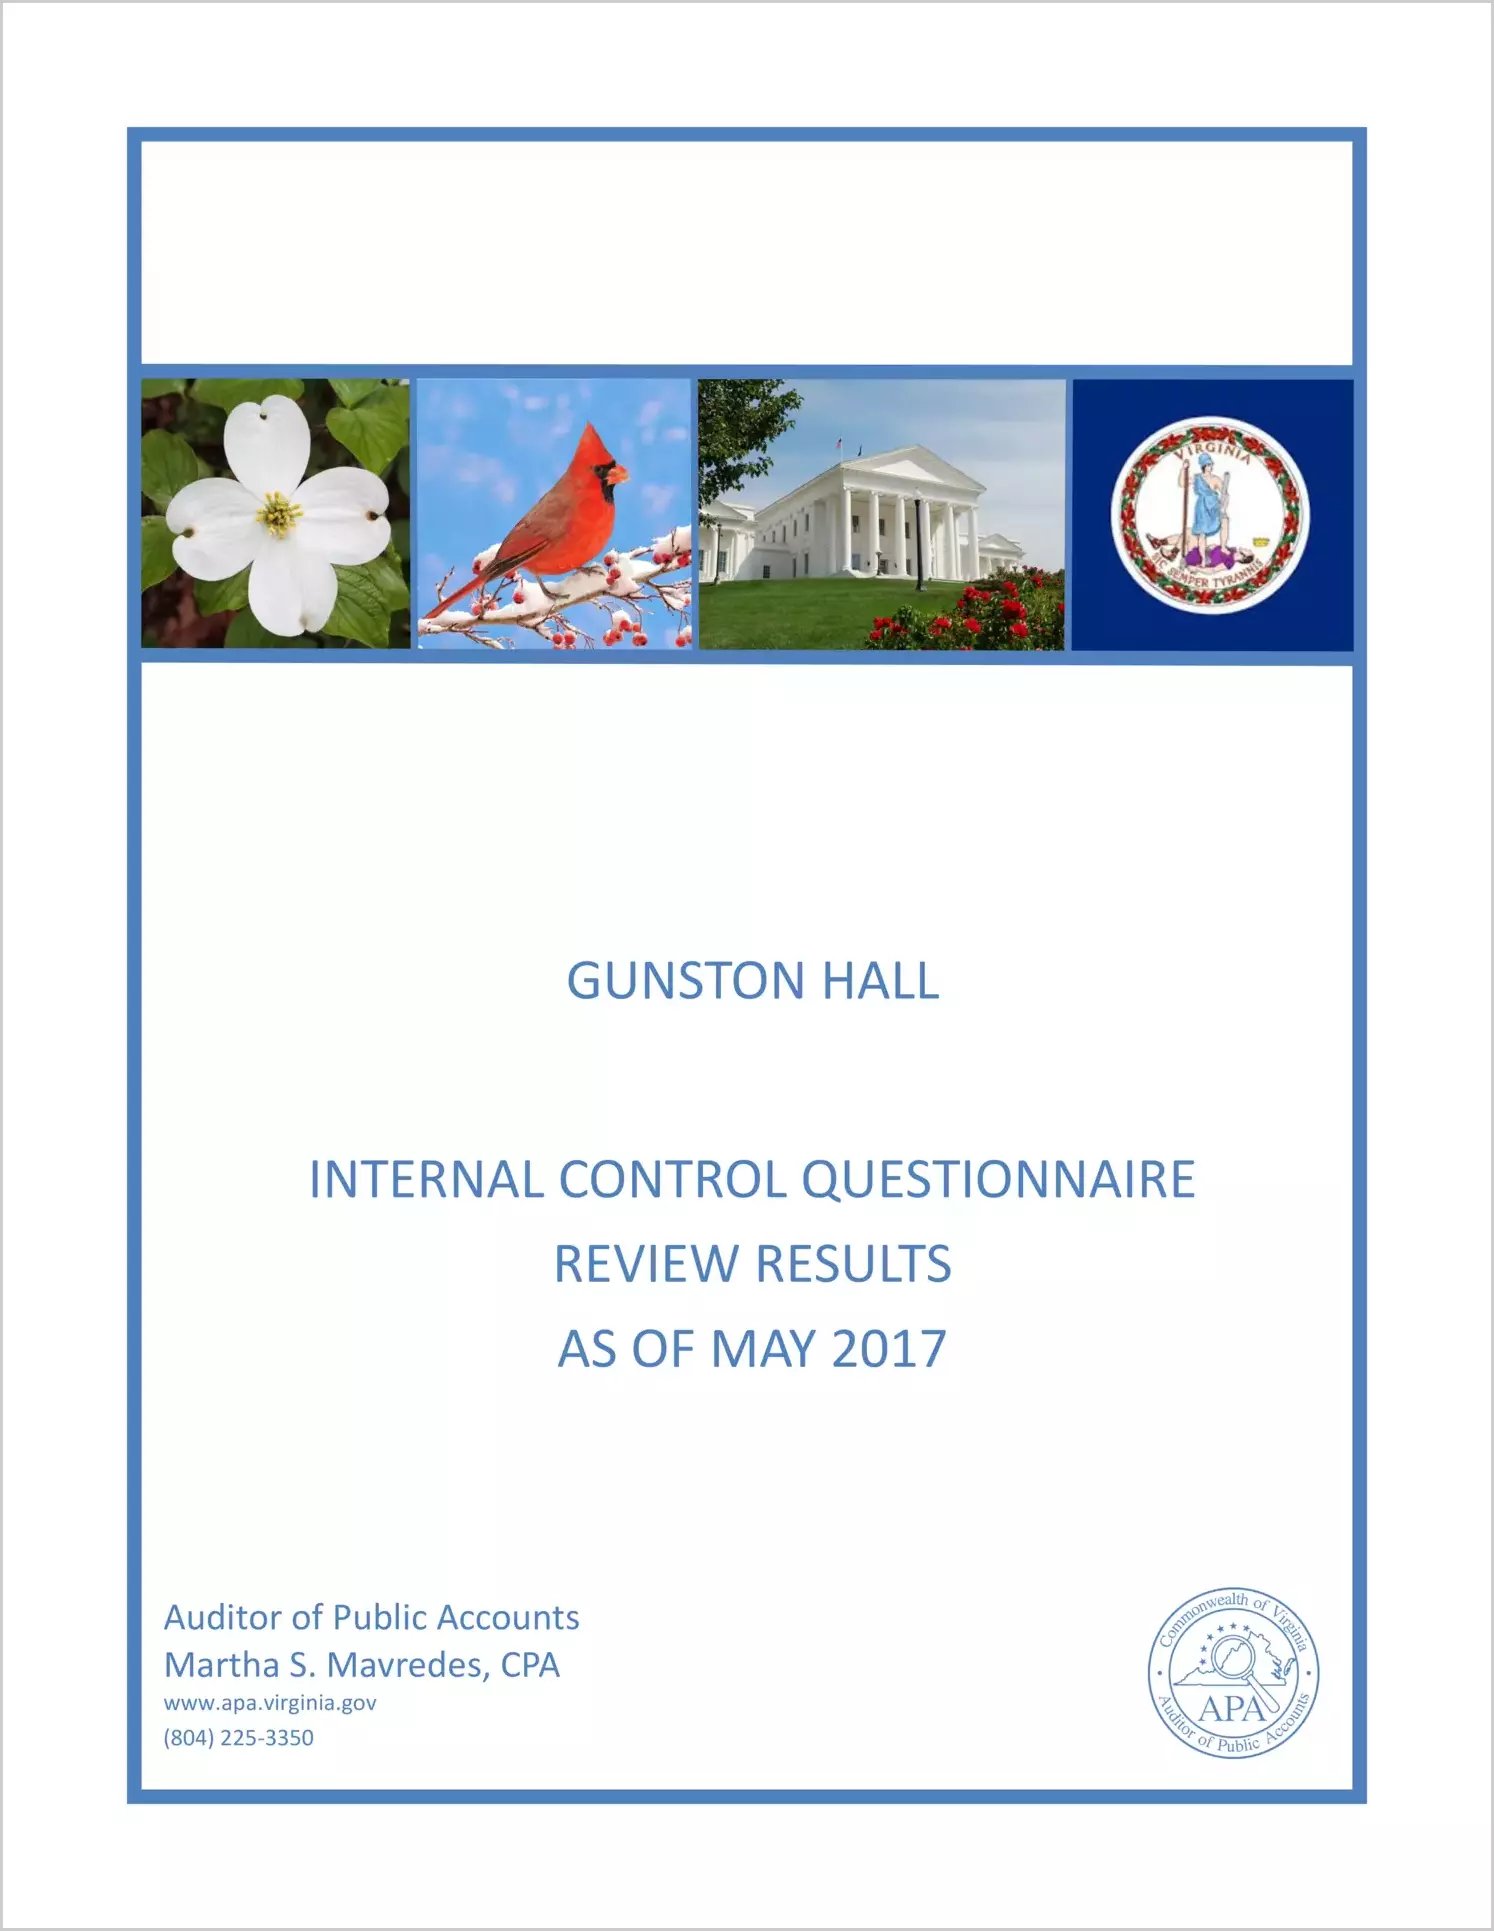 Gunston Hall Internal Control Questionnaire Review Results as of May 2017